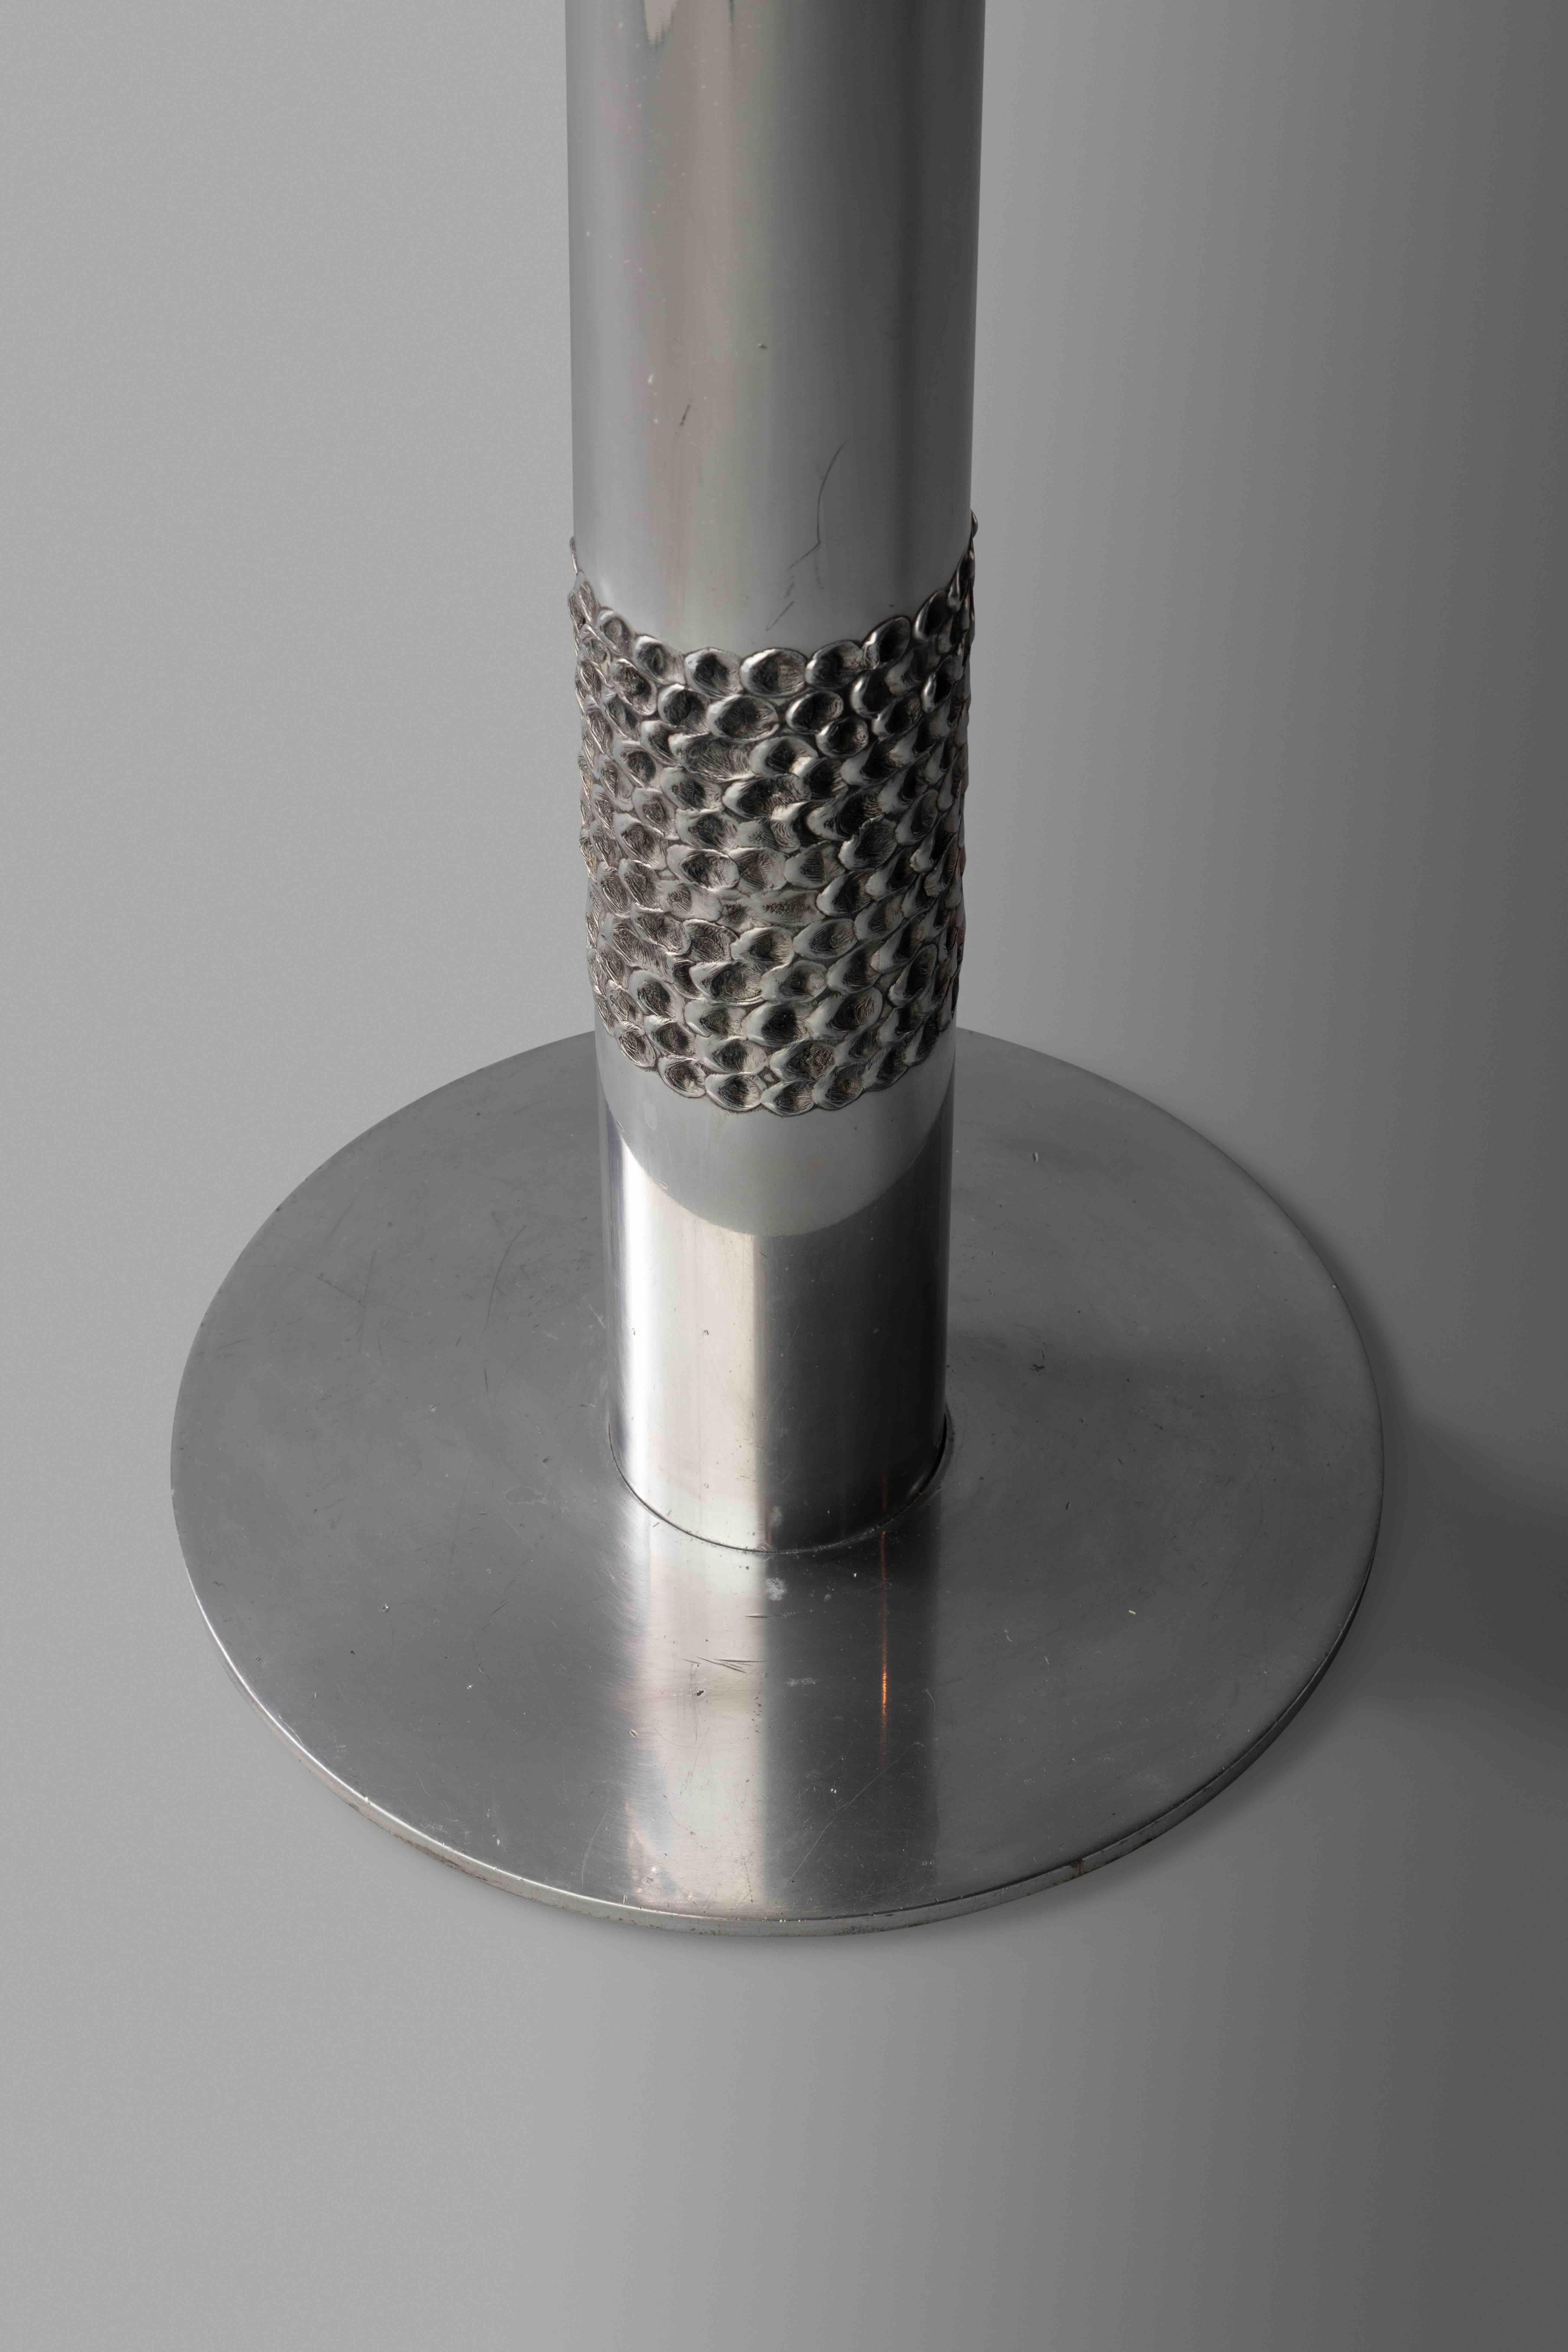 Cylindrical steel body decorated with small circular indented discs.